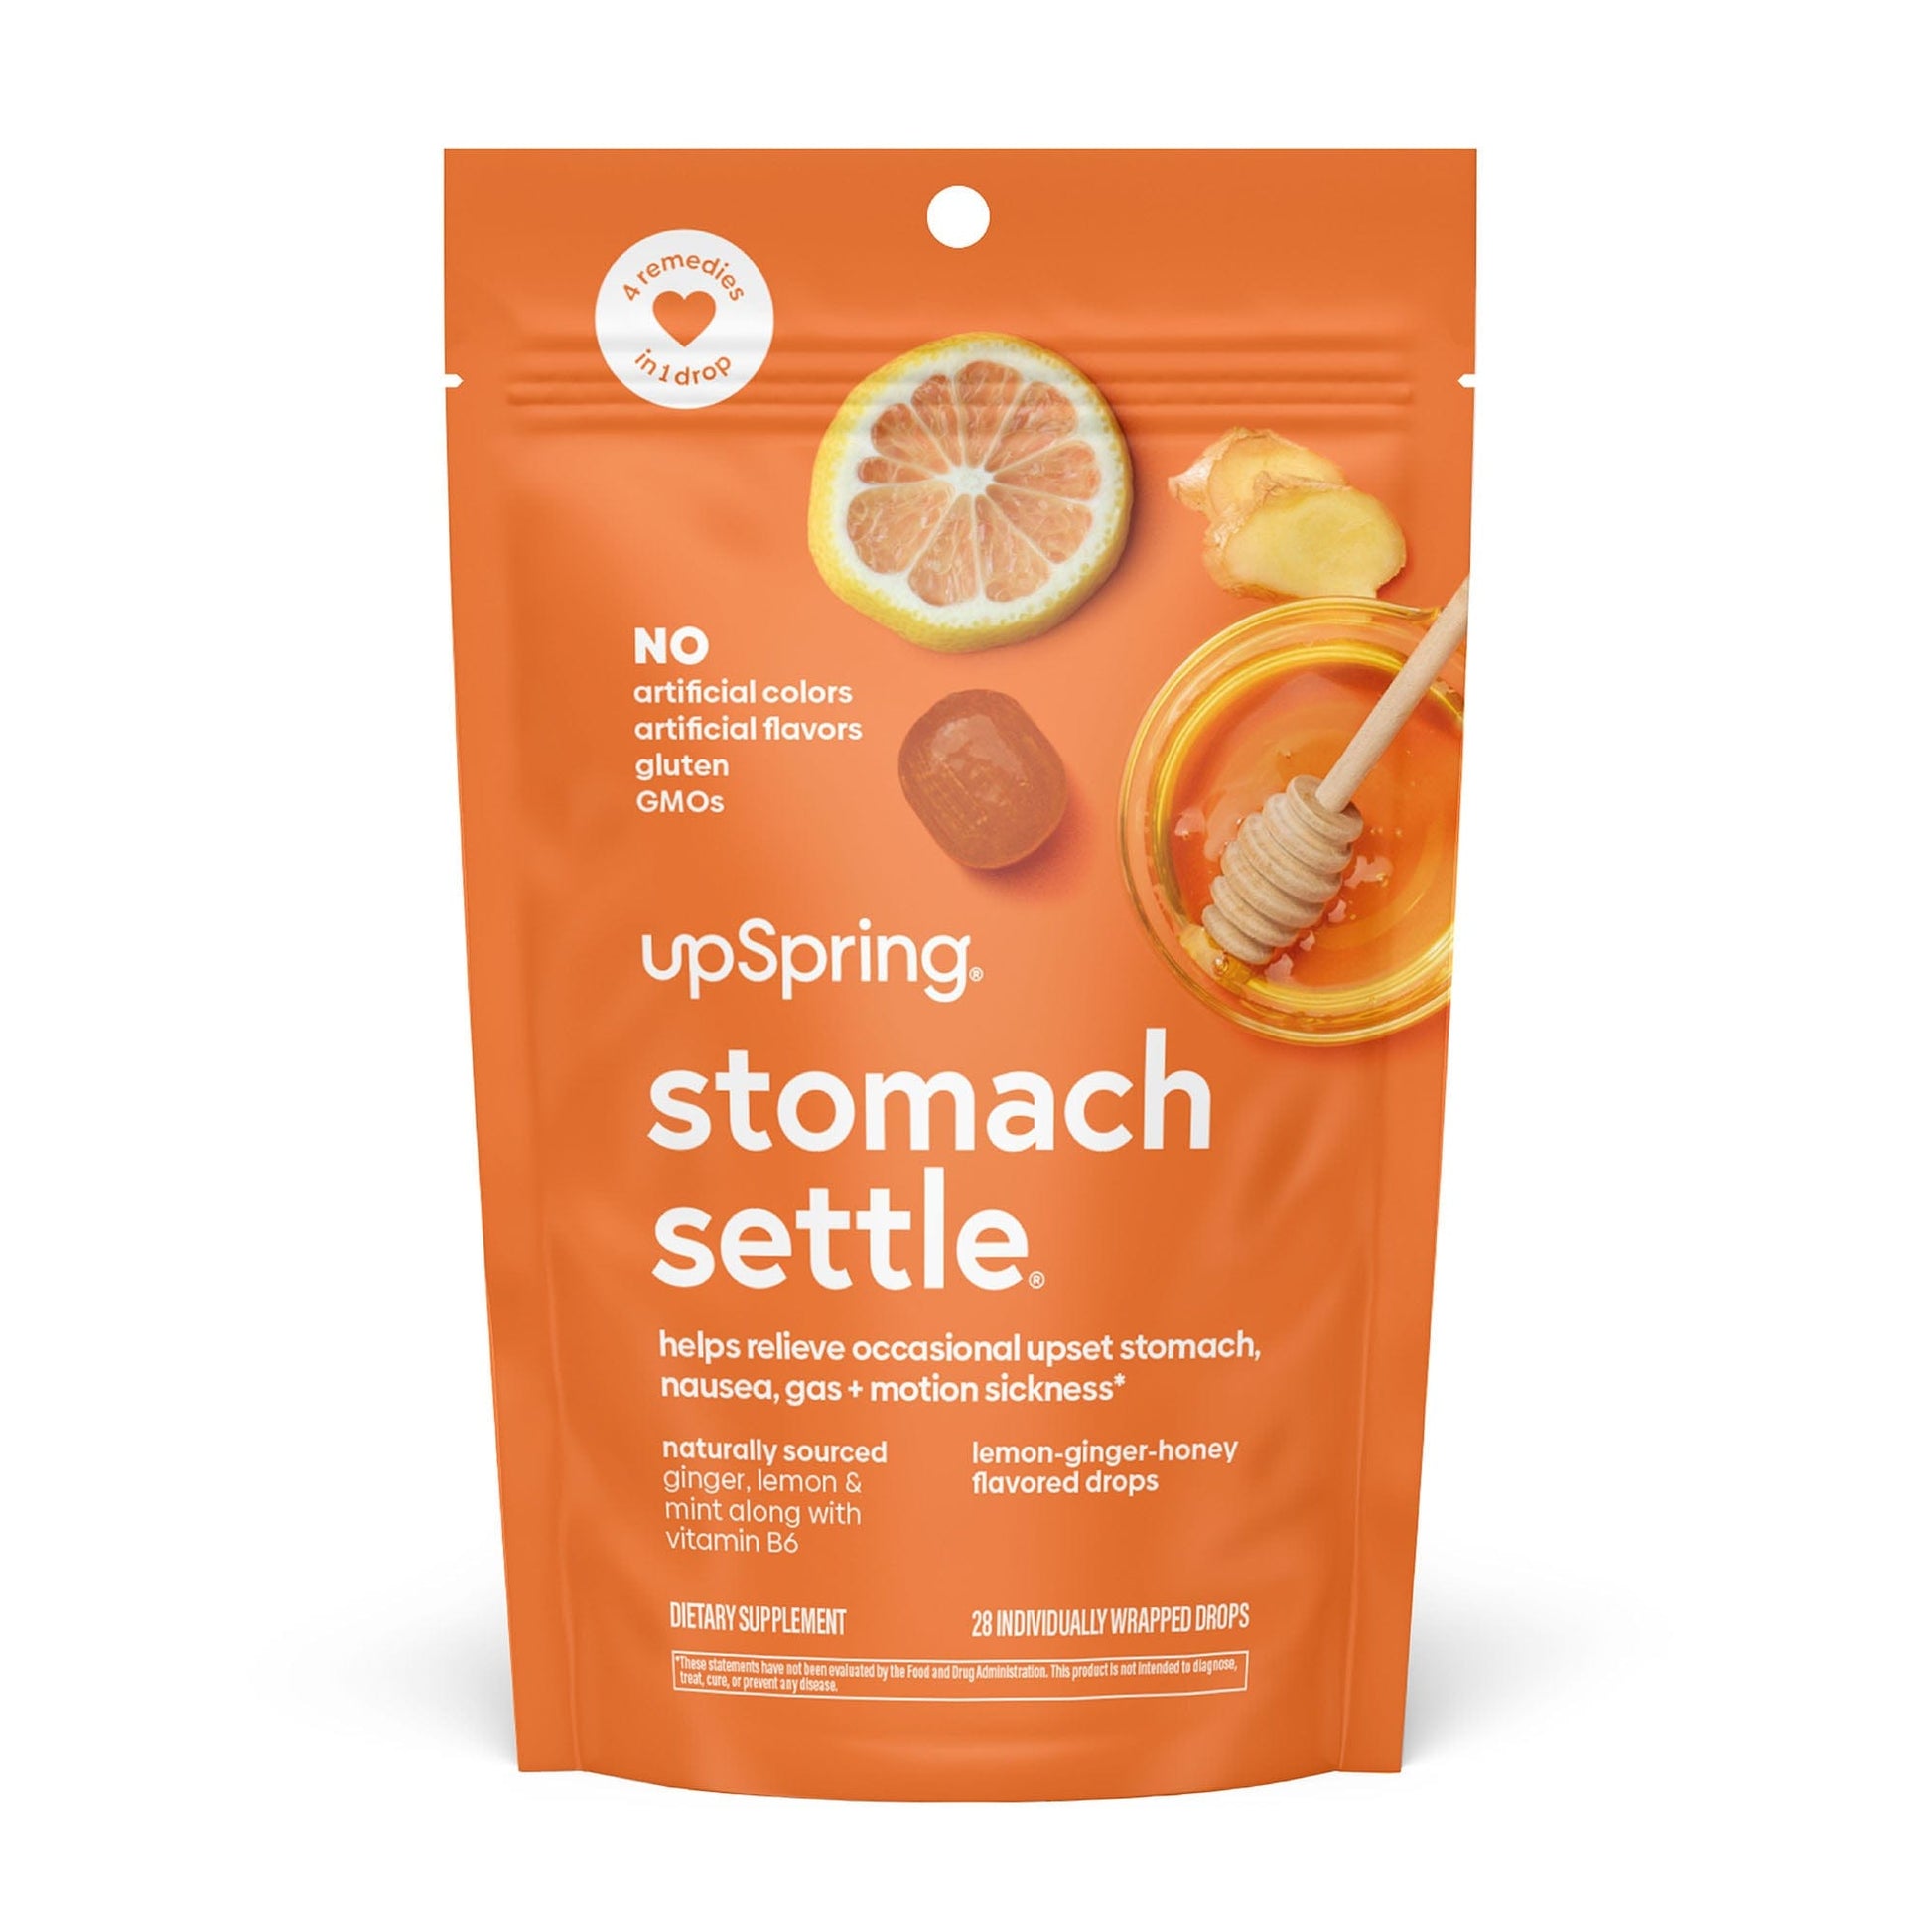 An orange colored bag of Stomach Settle by Upspring